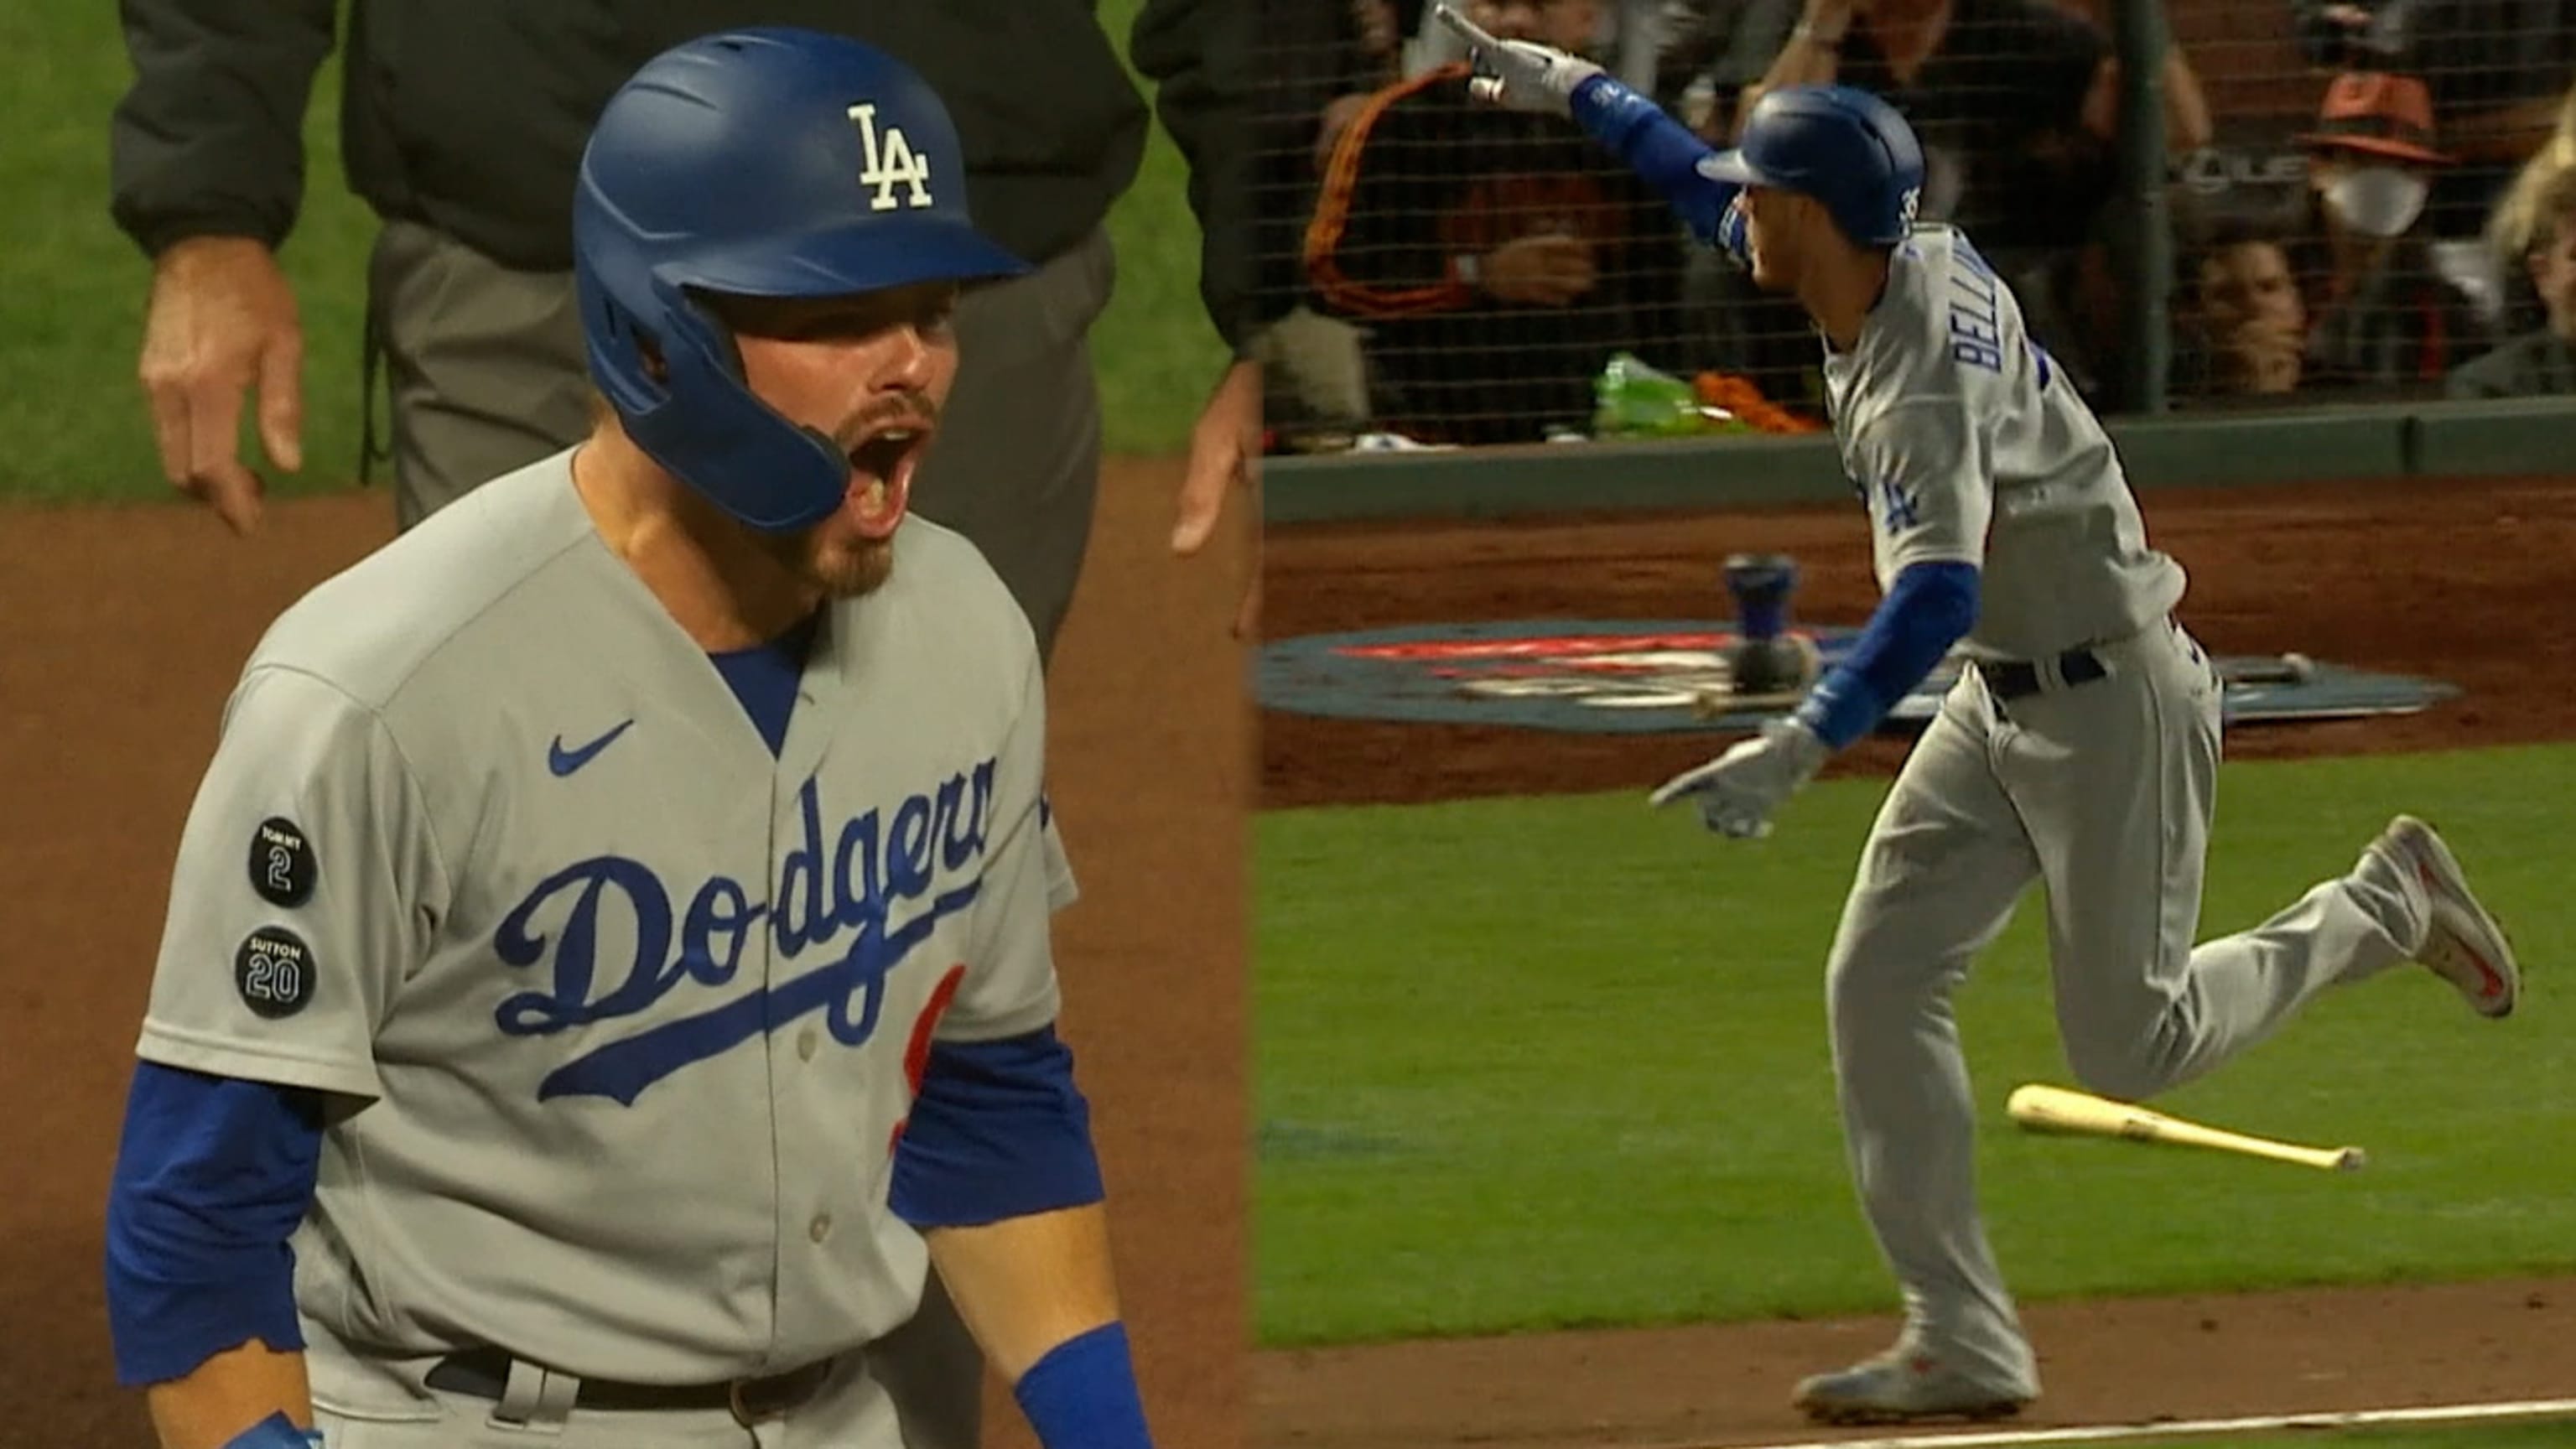 Giants dominate Dodgers to win series, extend NL West lead – KNBR